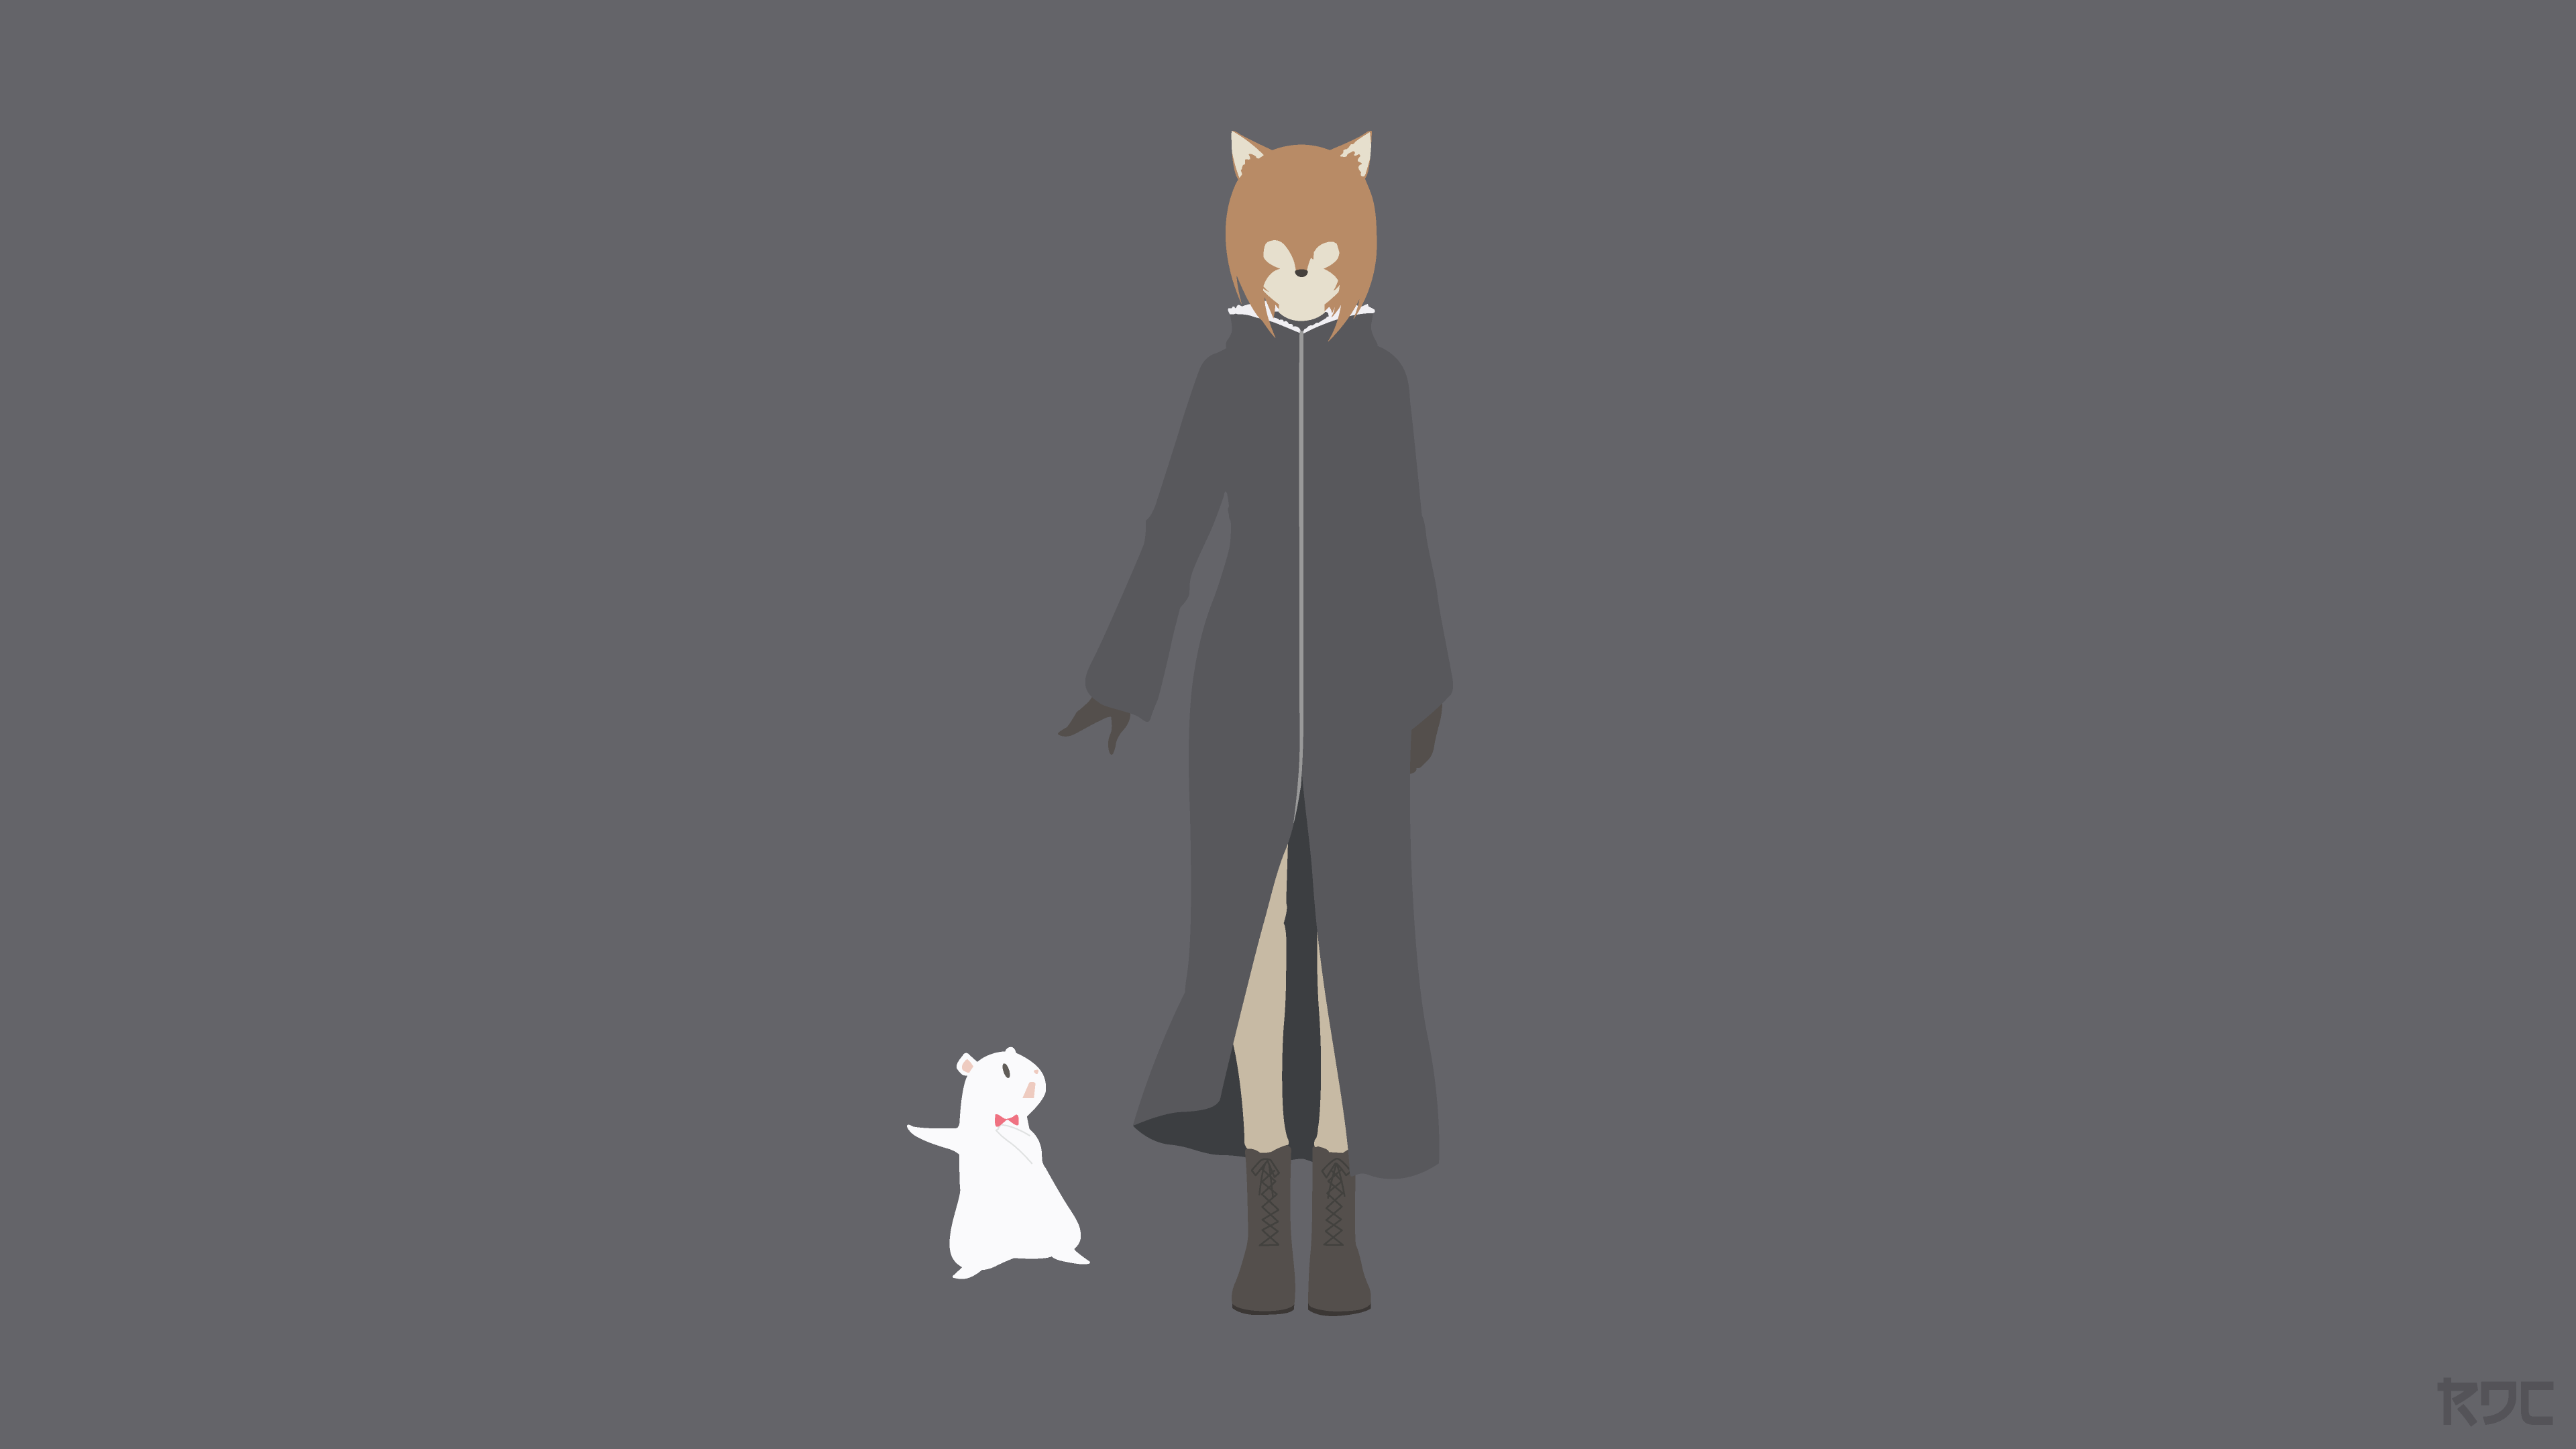 Anime 3840x2160 anime girls Flying Witch anime vectors animals animal ears gray background minimalism anime simple background